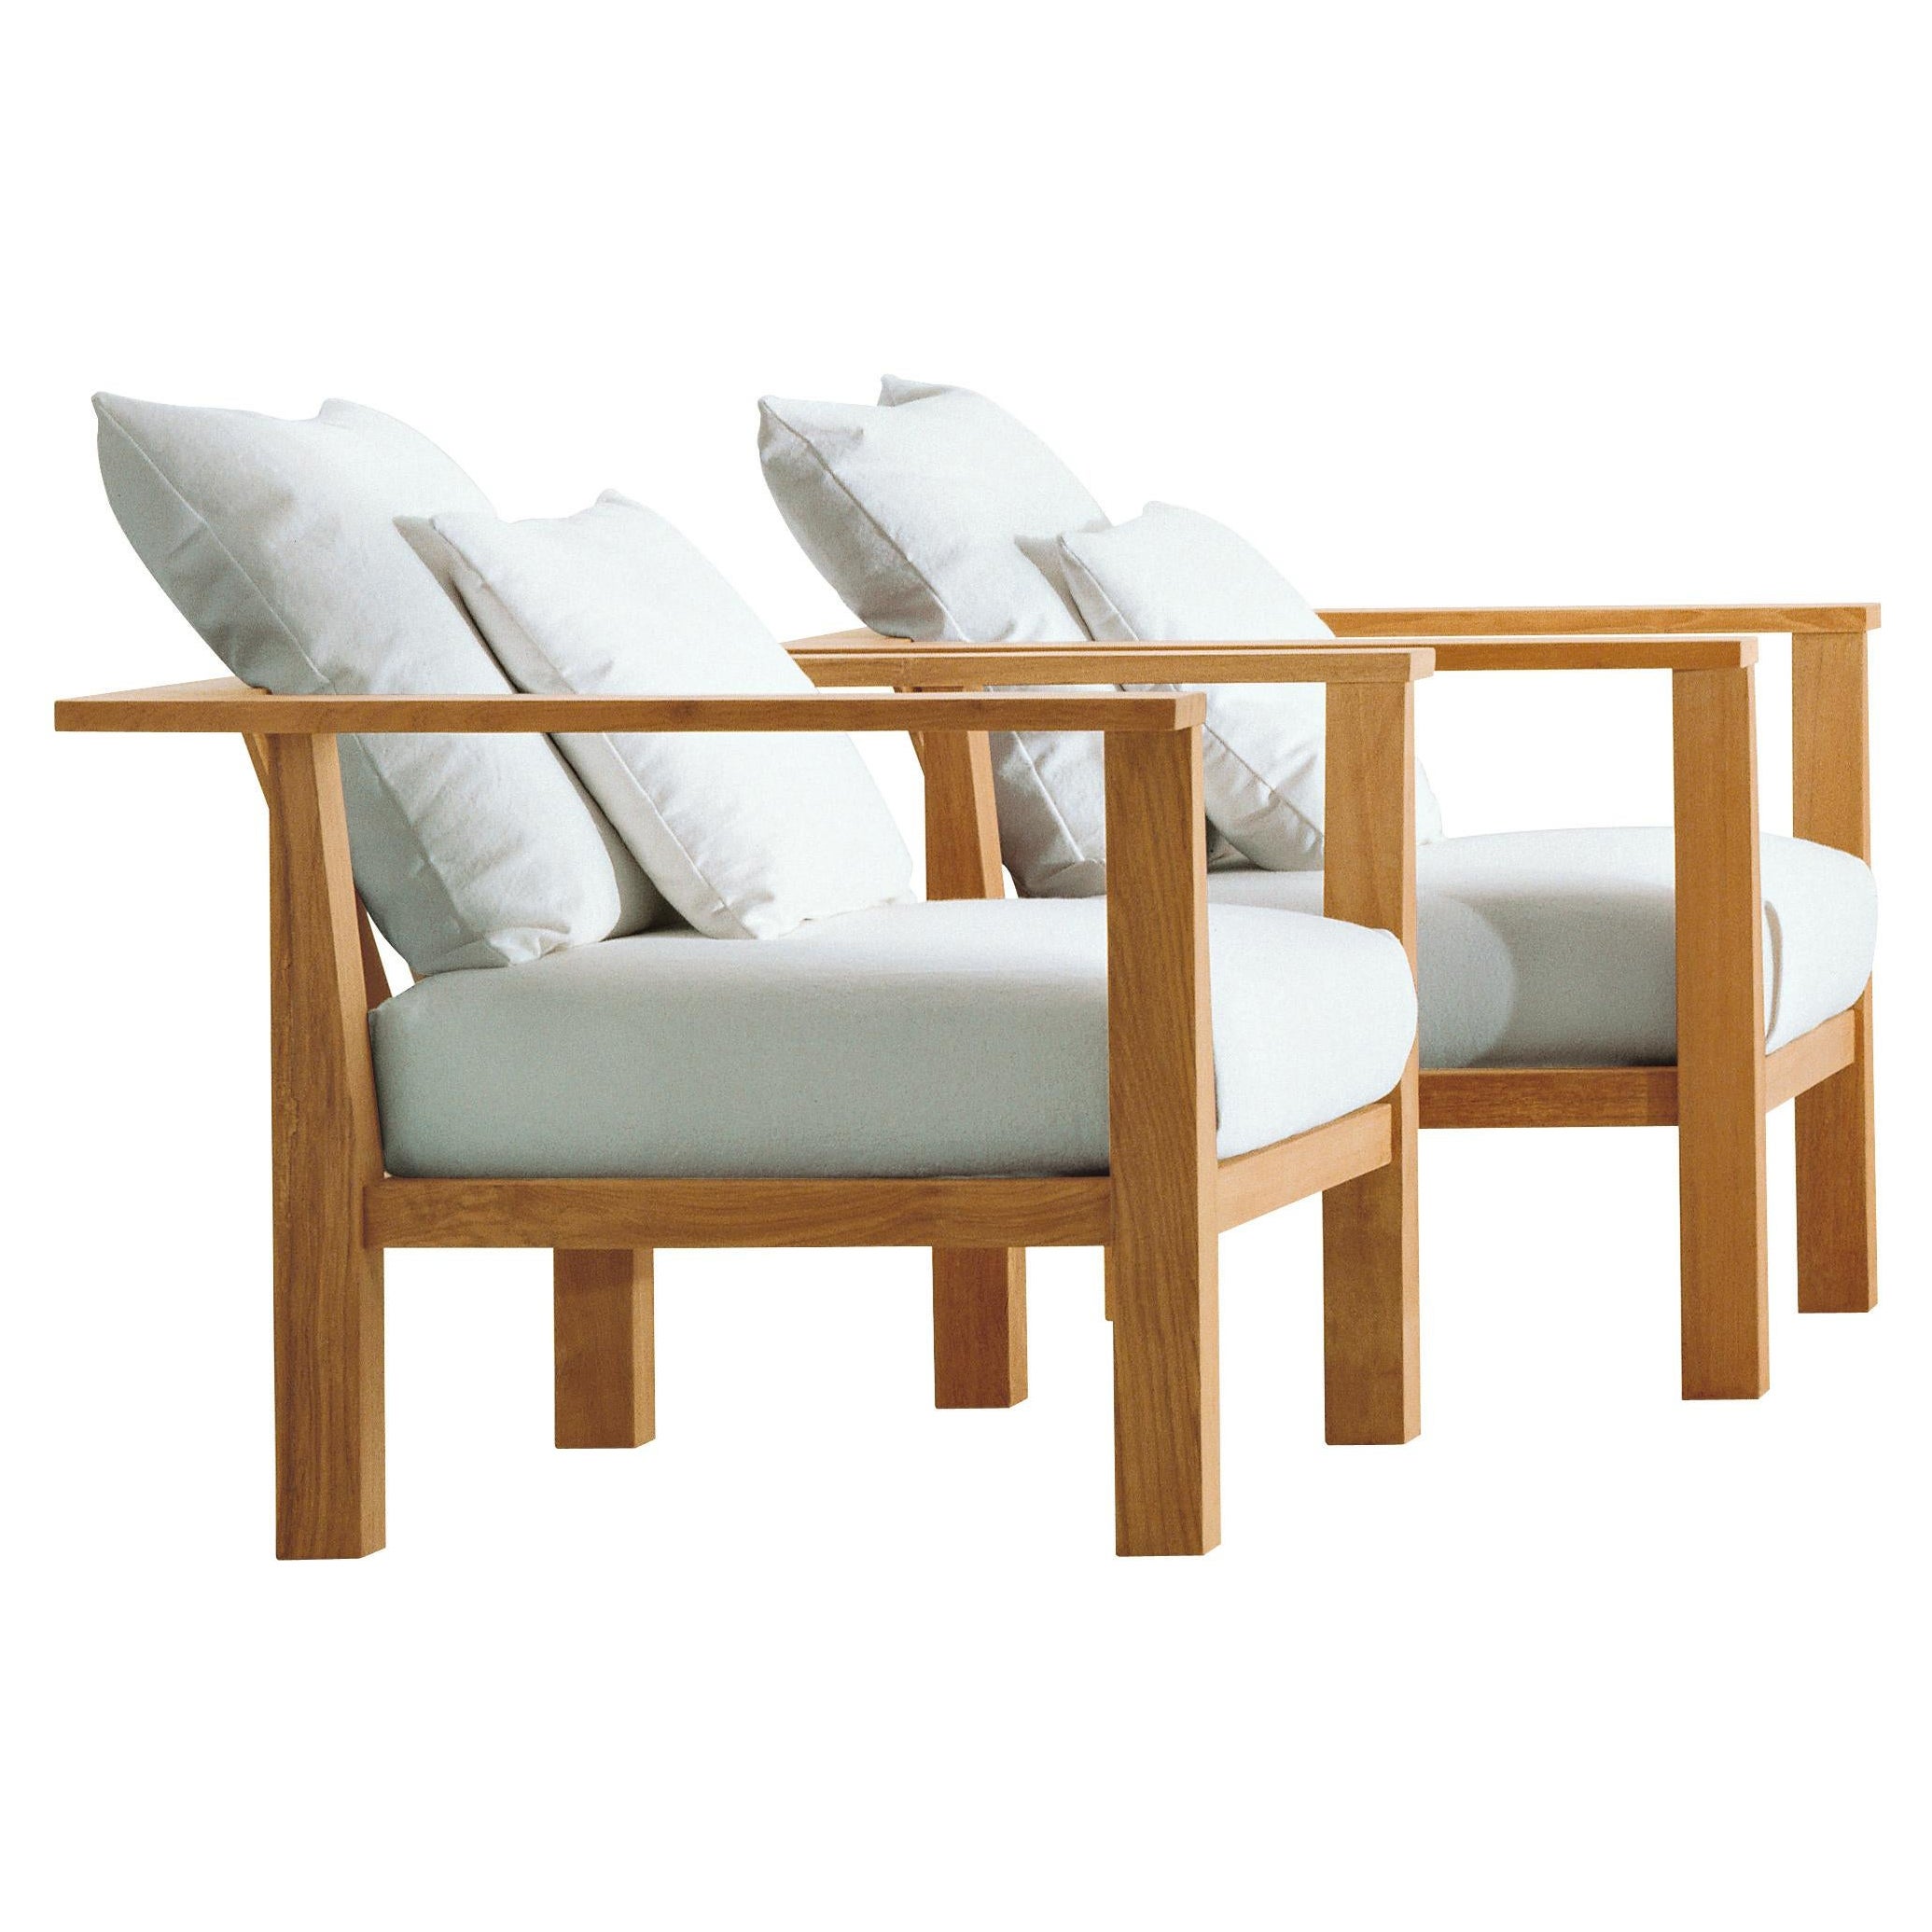 Gervasoni Inout 01 Armchair in Aspen 03 Upholstery with Natural Teak Frame